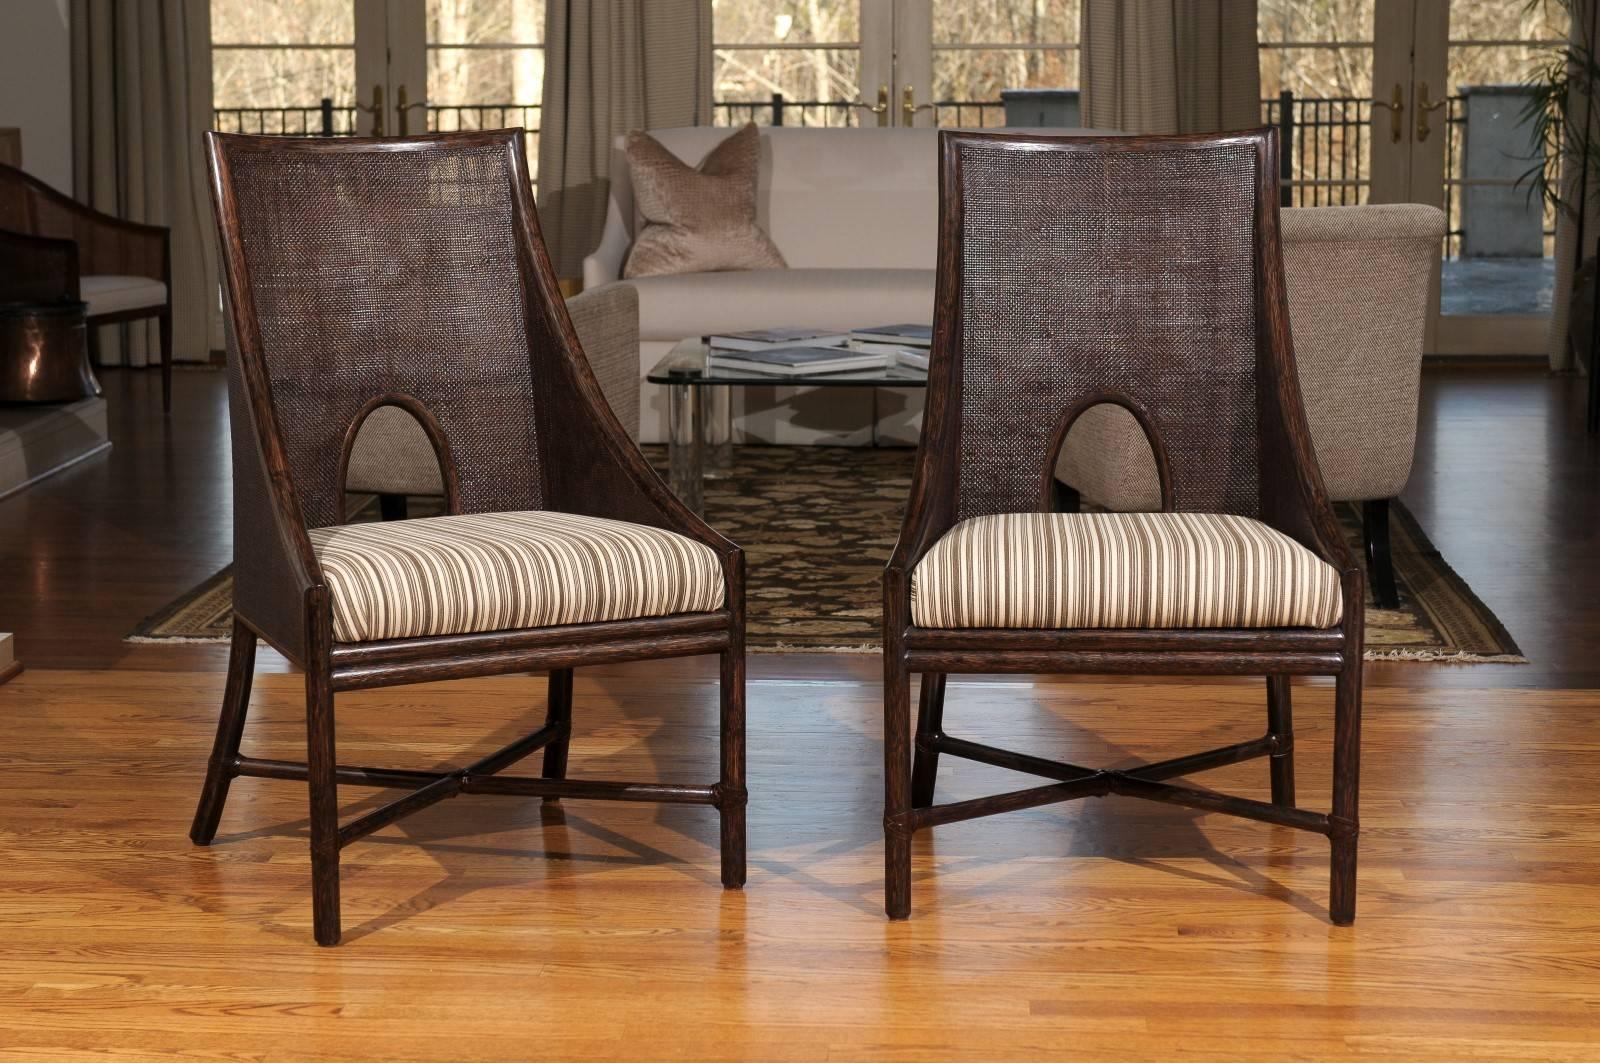 A fabulous set of six dining chairs by McGuire. Expert rattan frame construction with leather wrap joint accents; Tobacco finish. Exquisite fine cane mesh double faced back with loop detail. Stout, comfortable and suitable for heavy regular use.